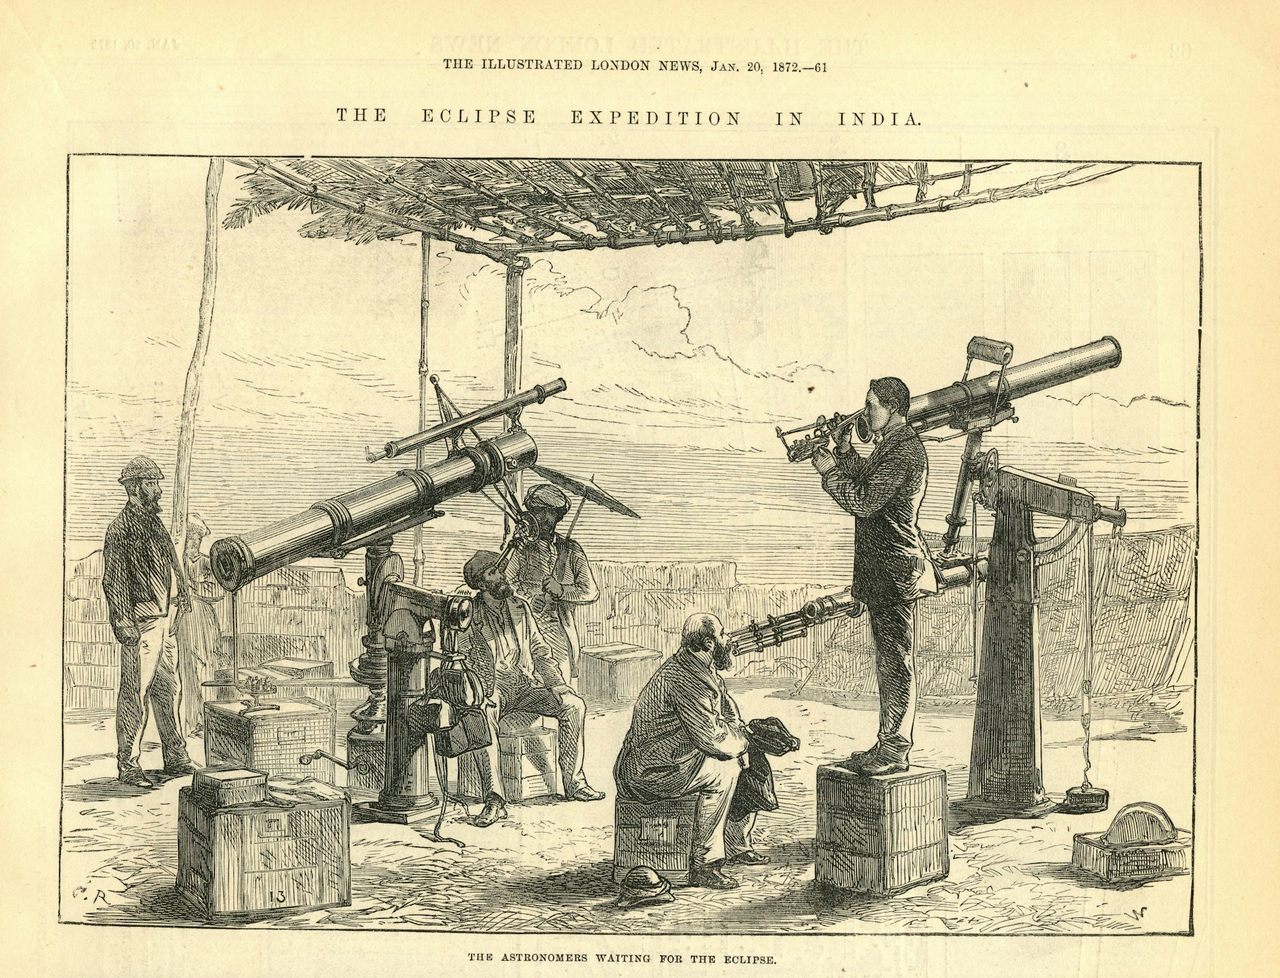 Have telescopes, will travel: English astronomers await an 1871 eclipse in India. 